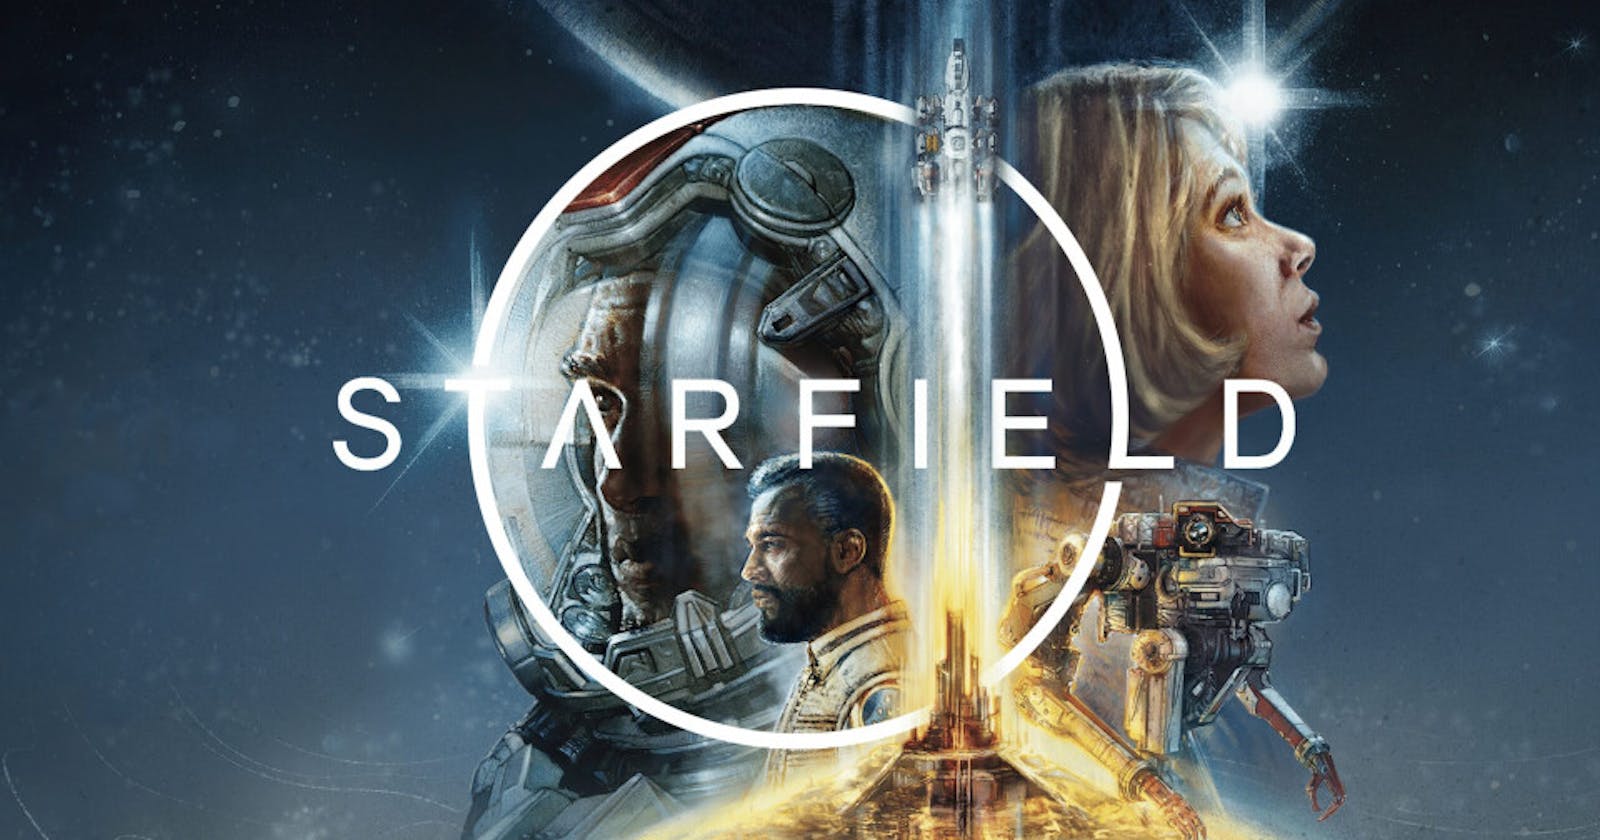 Bethesda. Thank you! Finally, The New Starfield trailers are OUT!